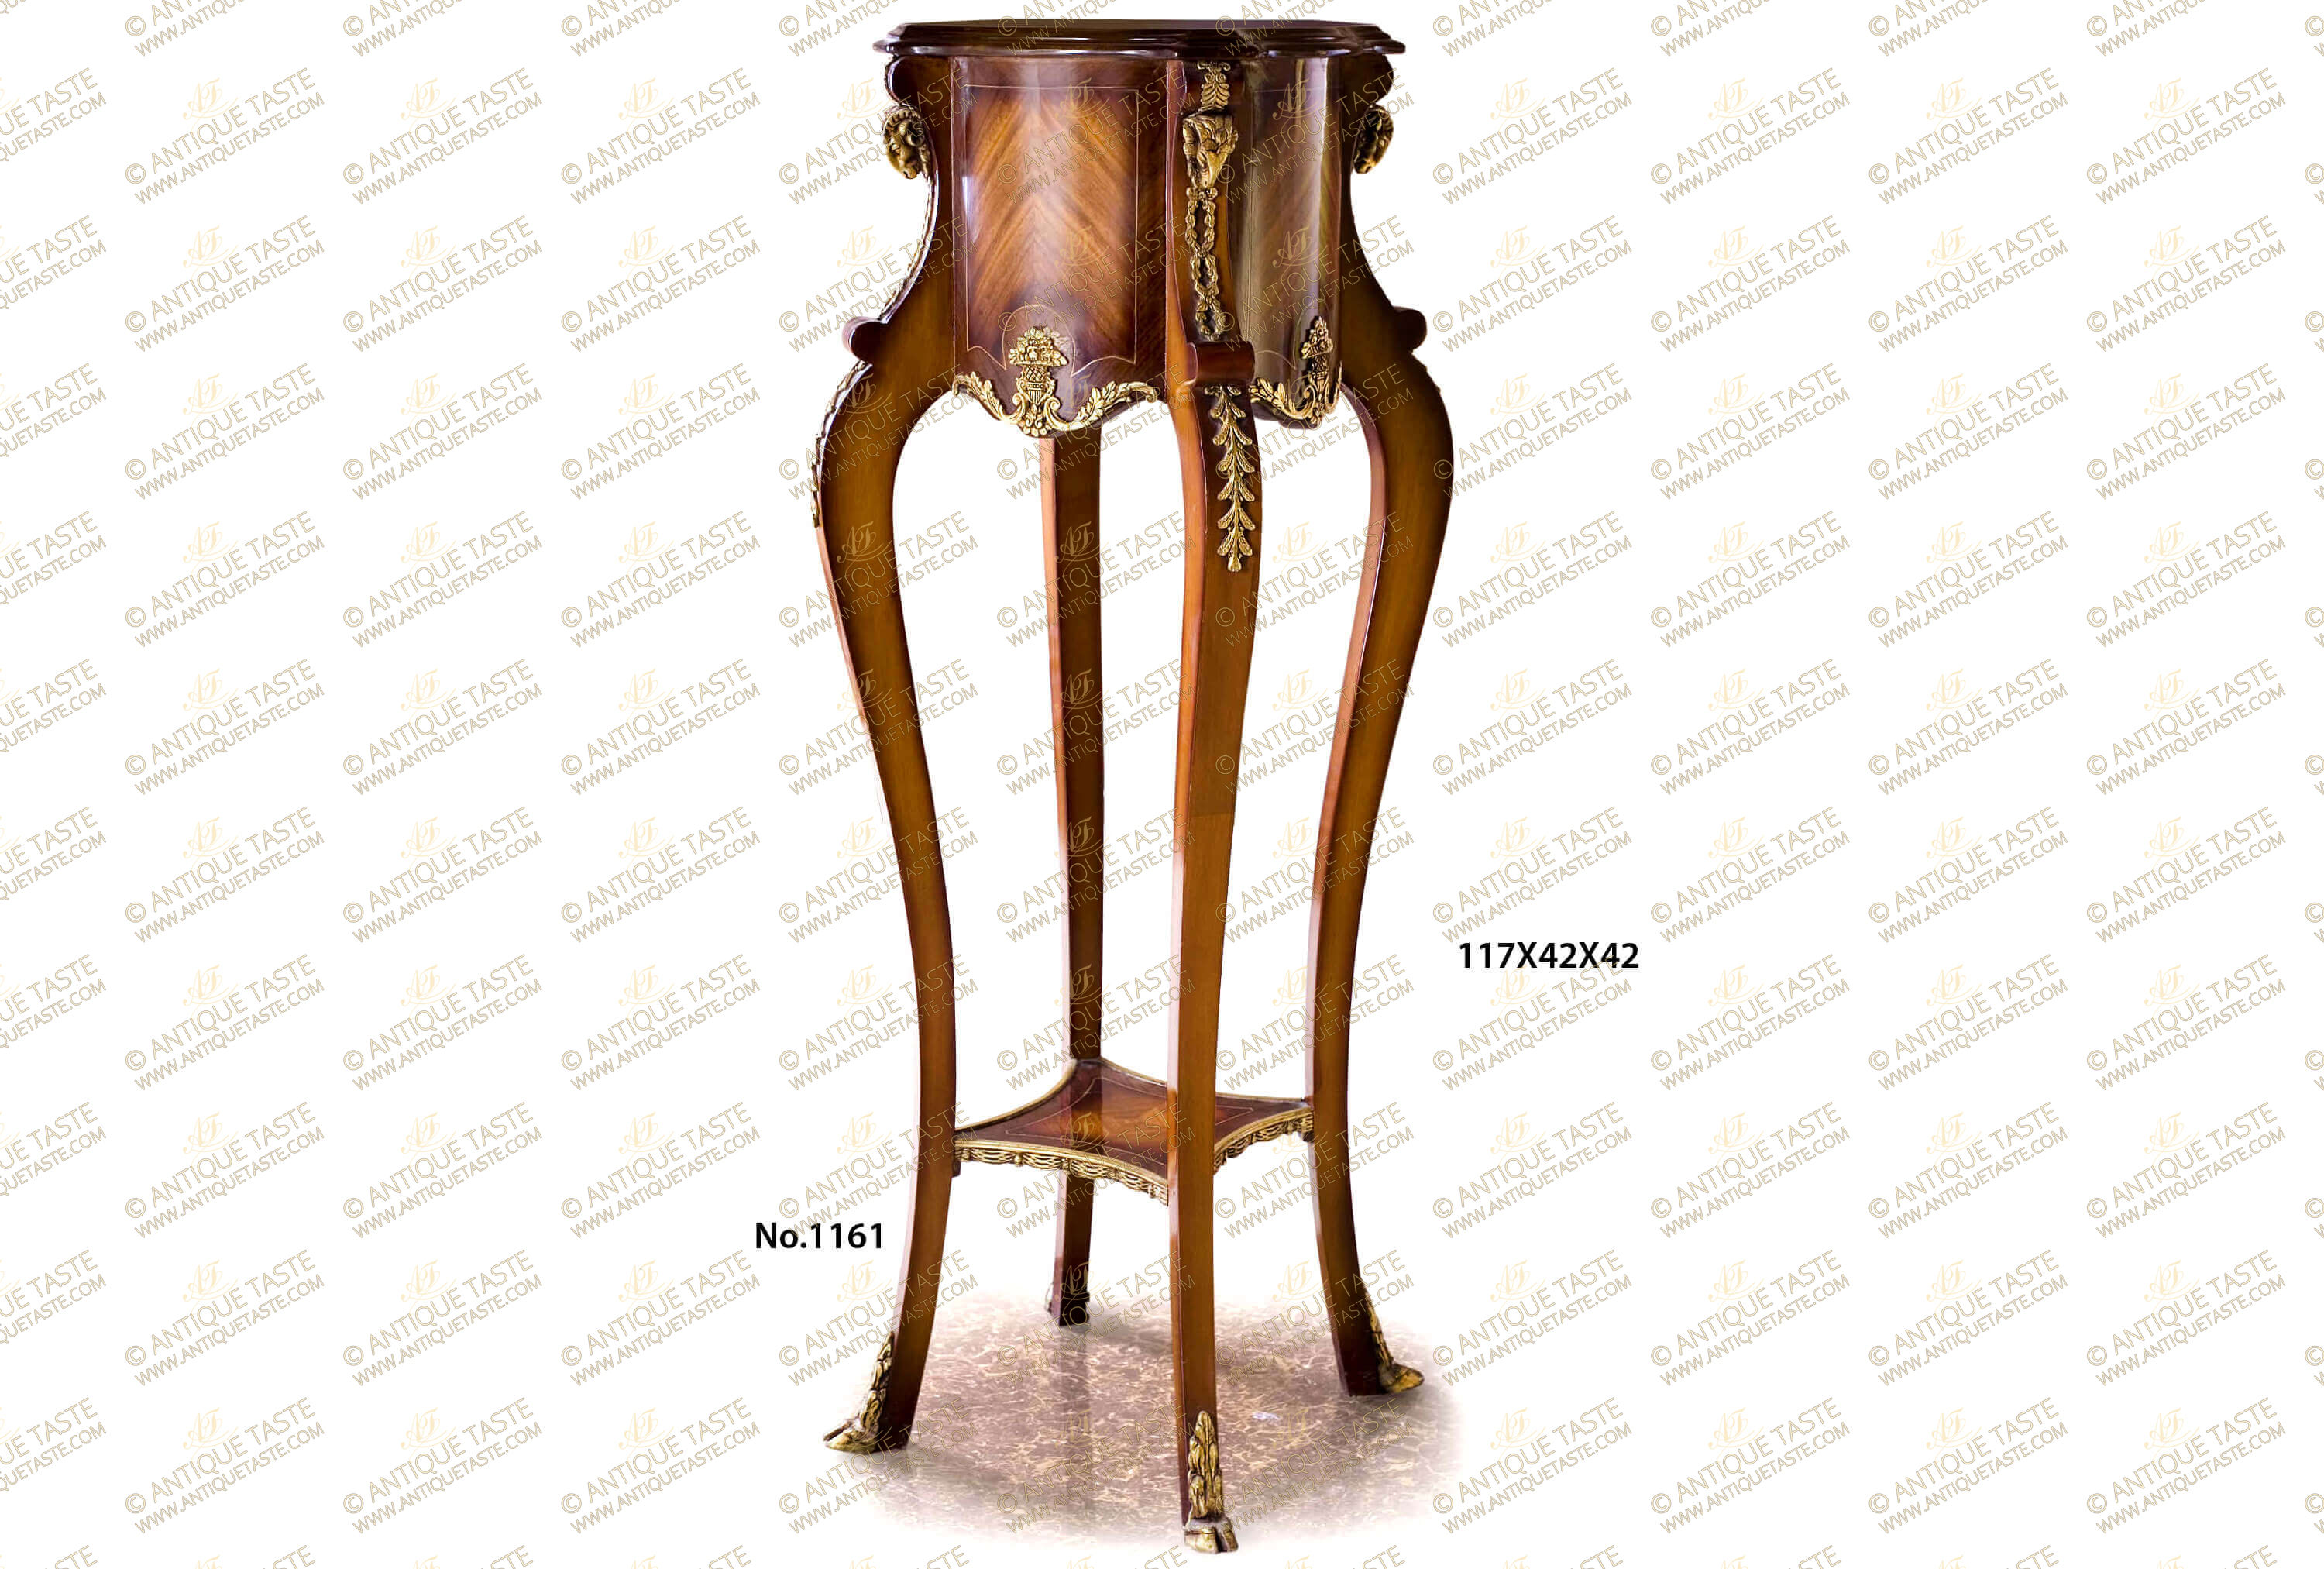 An extremely elegant French mid 19th Century Régence Louis XV early Rococo style ormolu-mounted and sans traverse crossbanded veneer inlaid grand Plant Stand Pedestal; The beautiful pedestal is raised on four convex curved slightly splayed legs adorned with four ormolu leafy hoof feet sabots and connected with a lower tier competently sans traverse veneer and filet inlaid and decorated with handsome swaging draped garlands ormolu mounts; Each leg is leading up transforming to concave shape support tops adorned with imbricated leafy ormolu mounted headed with finely chiseled and most detailed ormolu ram heads surmounted with an ormolu anthemion; the supports are surrounding the thick circular scallop shaped top tier which displays most decorative mottled designs with canted corners; the top tier is beautifully sans-traverse veneer and filet inlaid and ormolu-mounted with exquisite blossoming flower bouquet issuing scrolling acanthus leaves.